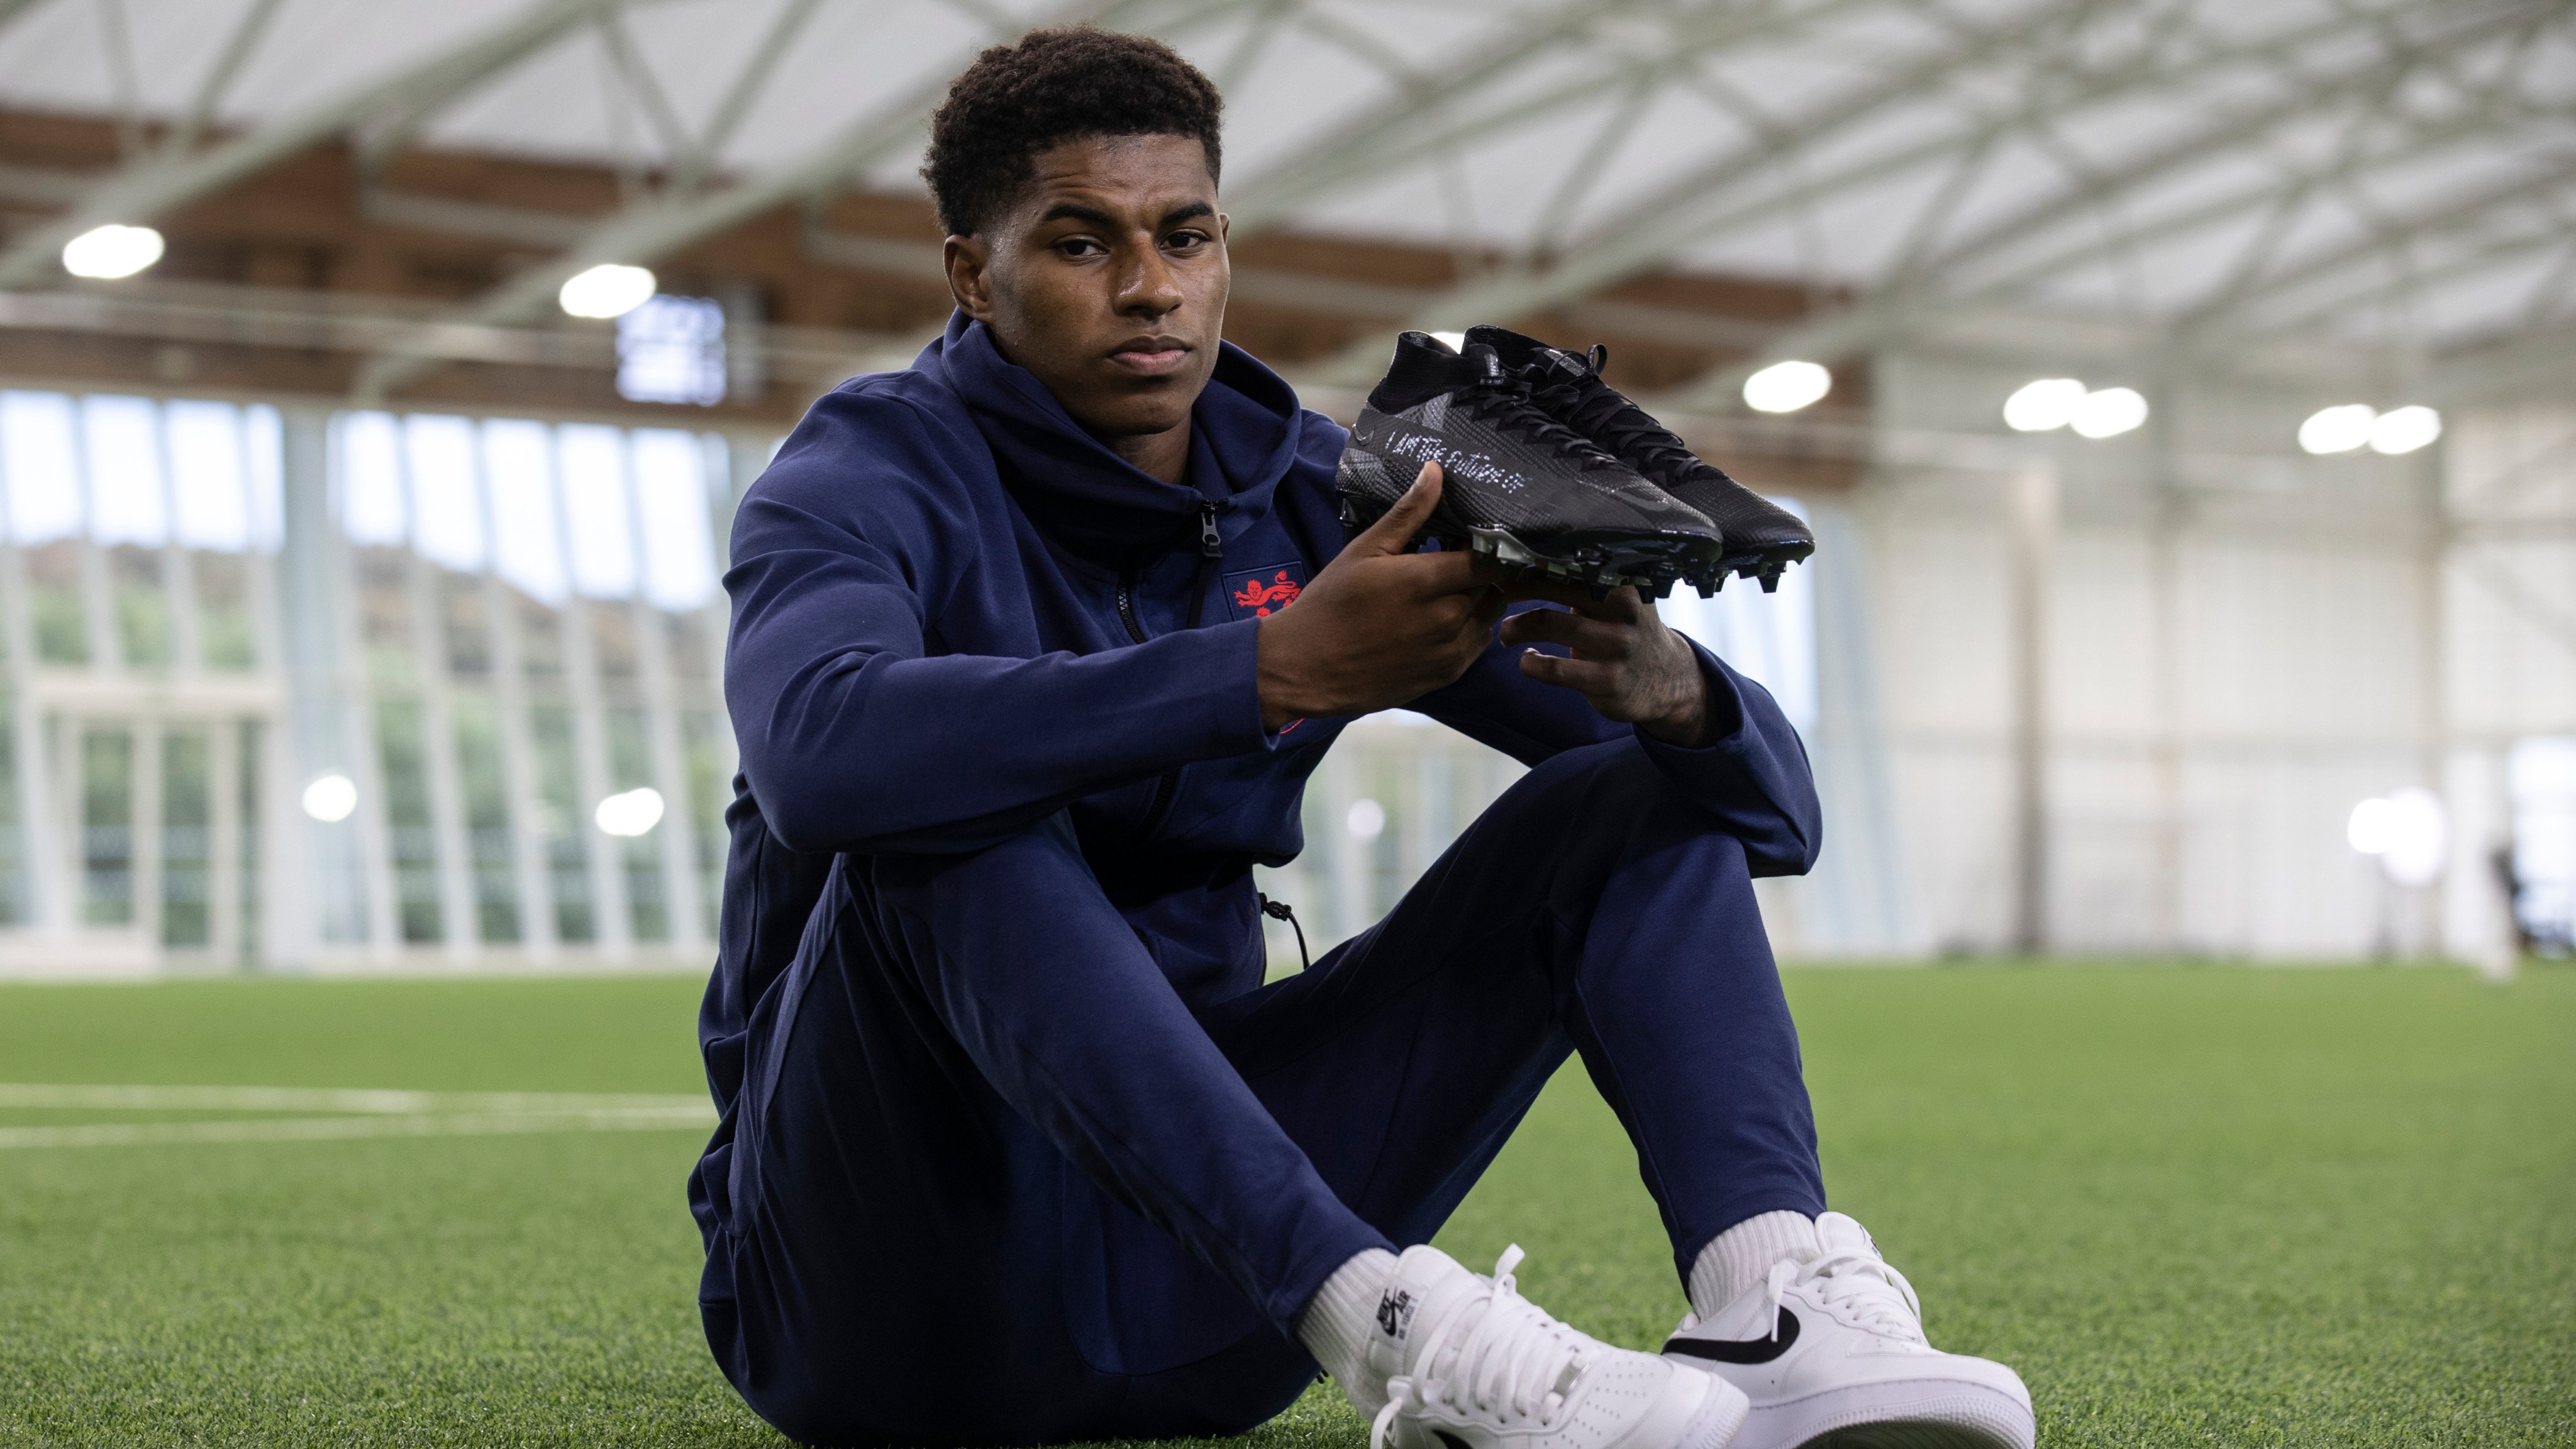 England on X: "Inspiring millions and giving a voice to the next  generation. @MarcusRashford will wear a special pair of @nikefootball boots  in today's game against Belgium  https://t.co/VL67KsoMtz" / X